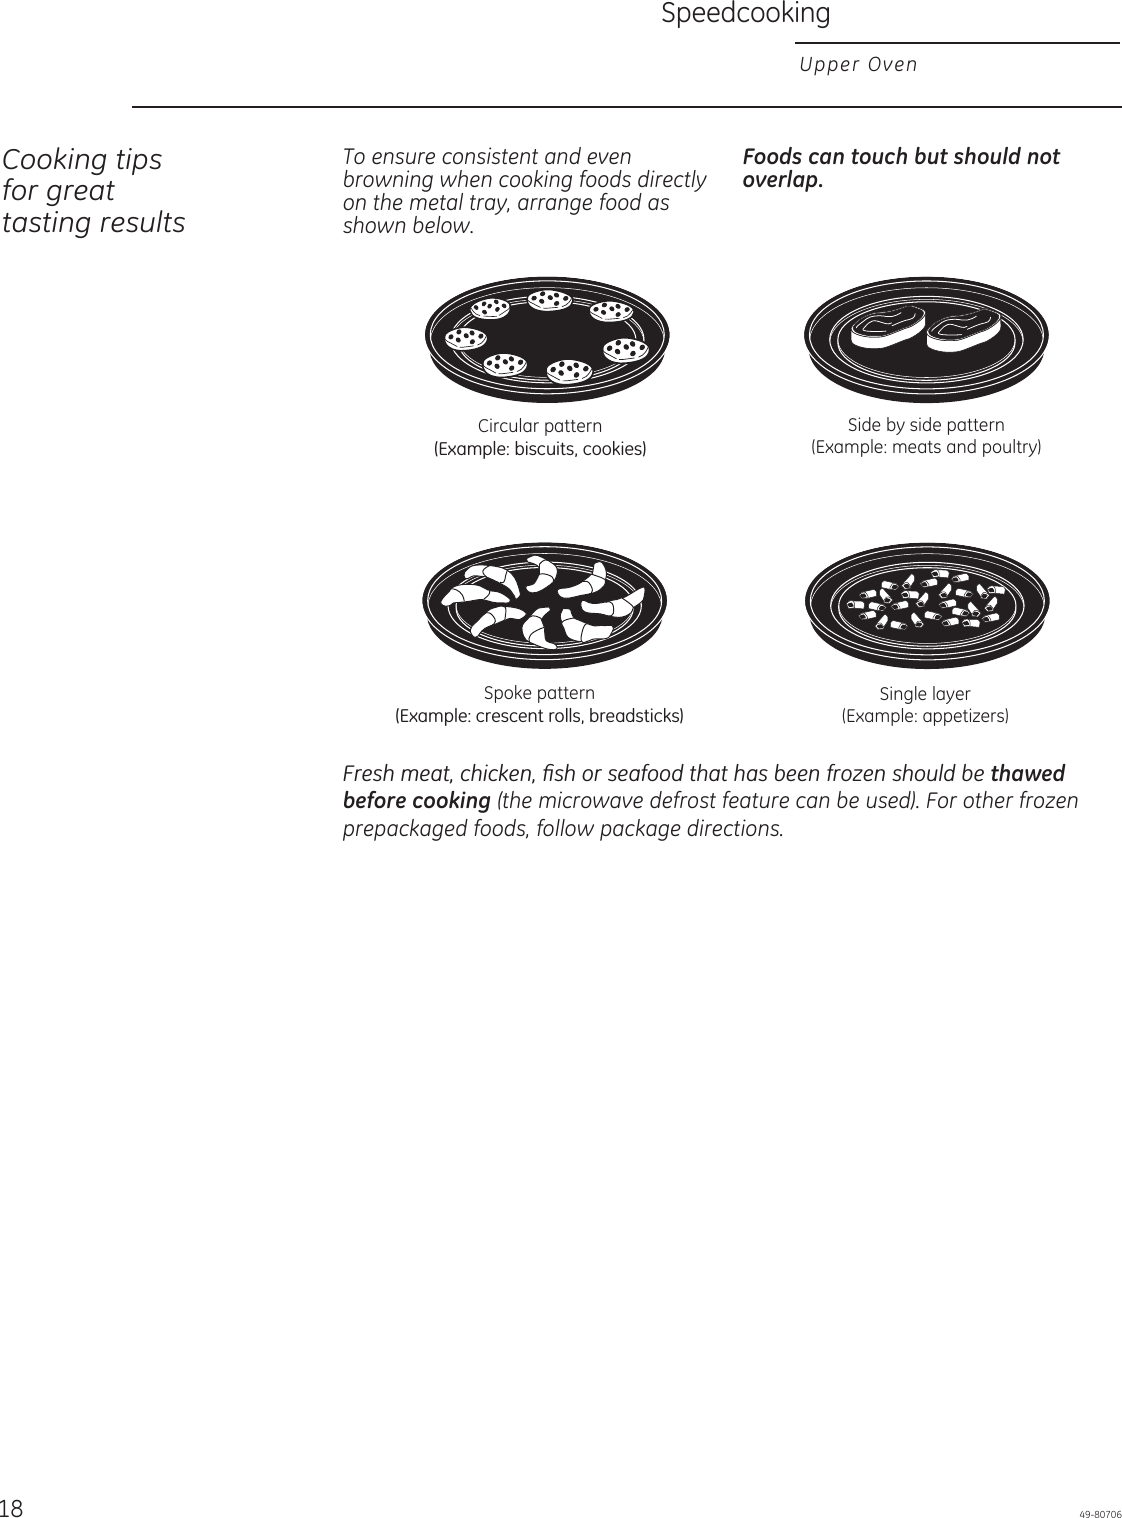 18 49-80706SpeedcookingUpper OvenCooking tips for great tasting resultsTo ensure consistent and even  browning when cooking foods directly on the metal tray, arrange food as shown below.Foods can touch but should not overlap.Circular pattern([DPSOHELVFXLWVFRRNLHVSpoke pattern([DPSOHFUHVFHQWUROOVEUHDGVWLFNVSingle layer(Example: appetizers)Side by side pattern(Example: meats and poultry))UHVKPHDWFKLFNHQ¿VKRUVHDIRRGWKDWKDVEHHQIUR]HQVKRXOGEHthawed before cooking (the microwave defrost feature can be used). For other frozen prepackaged foods, follow package directions.